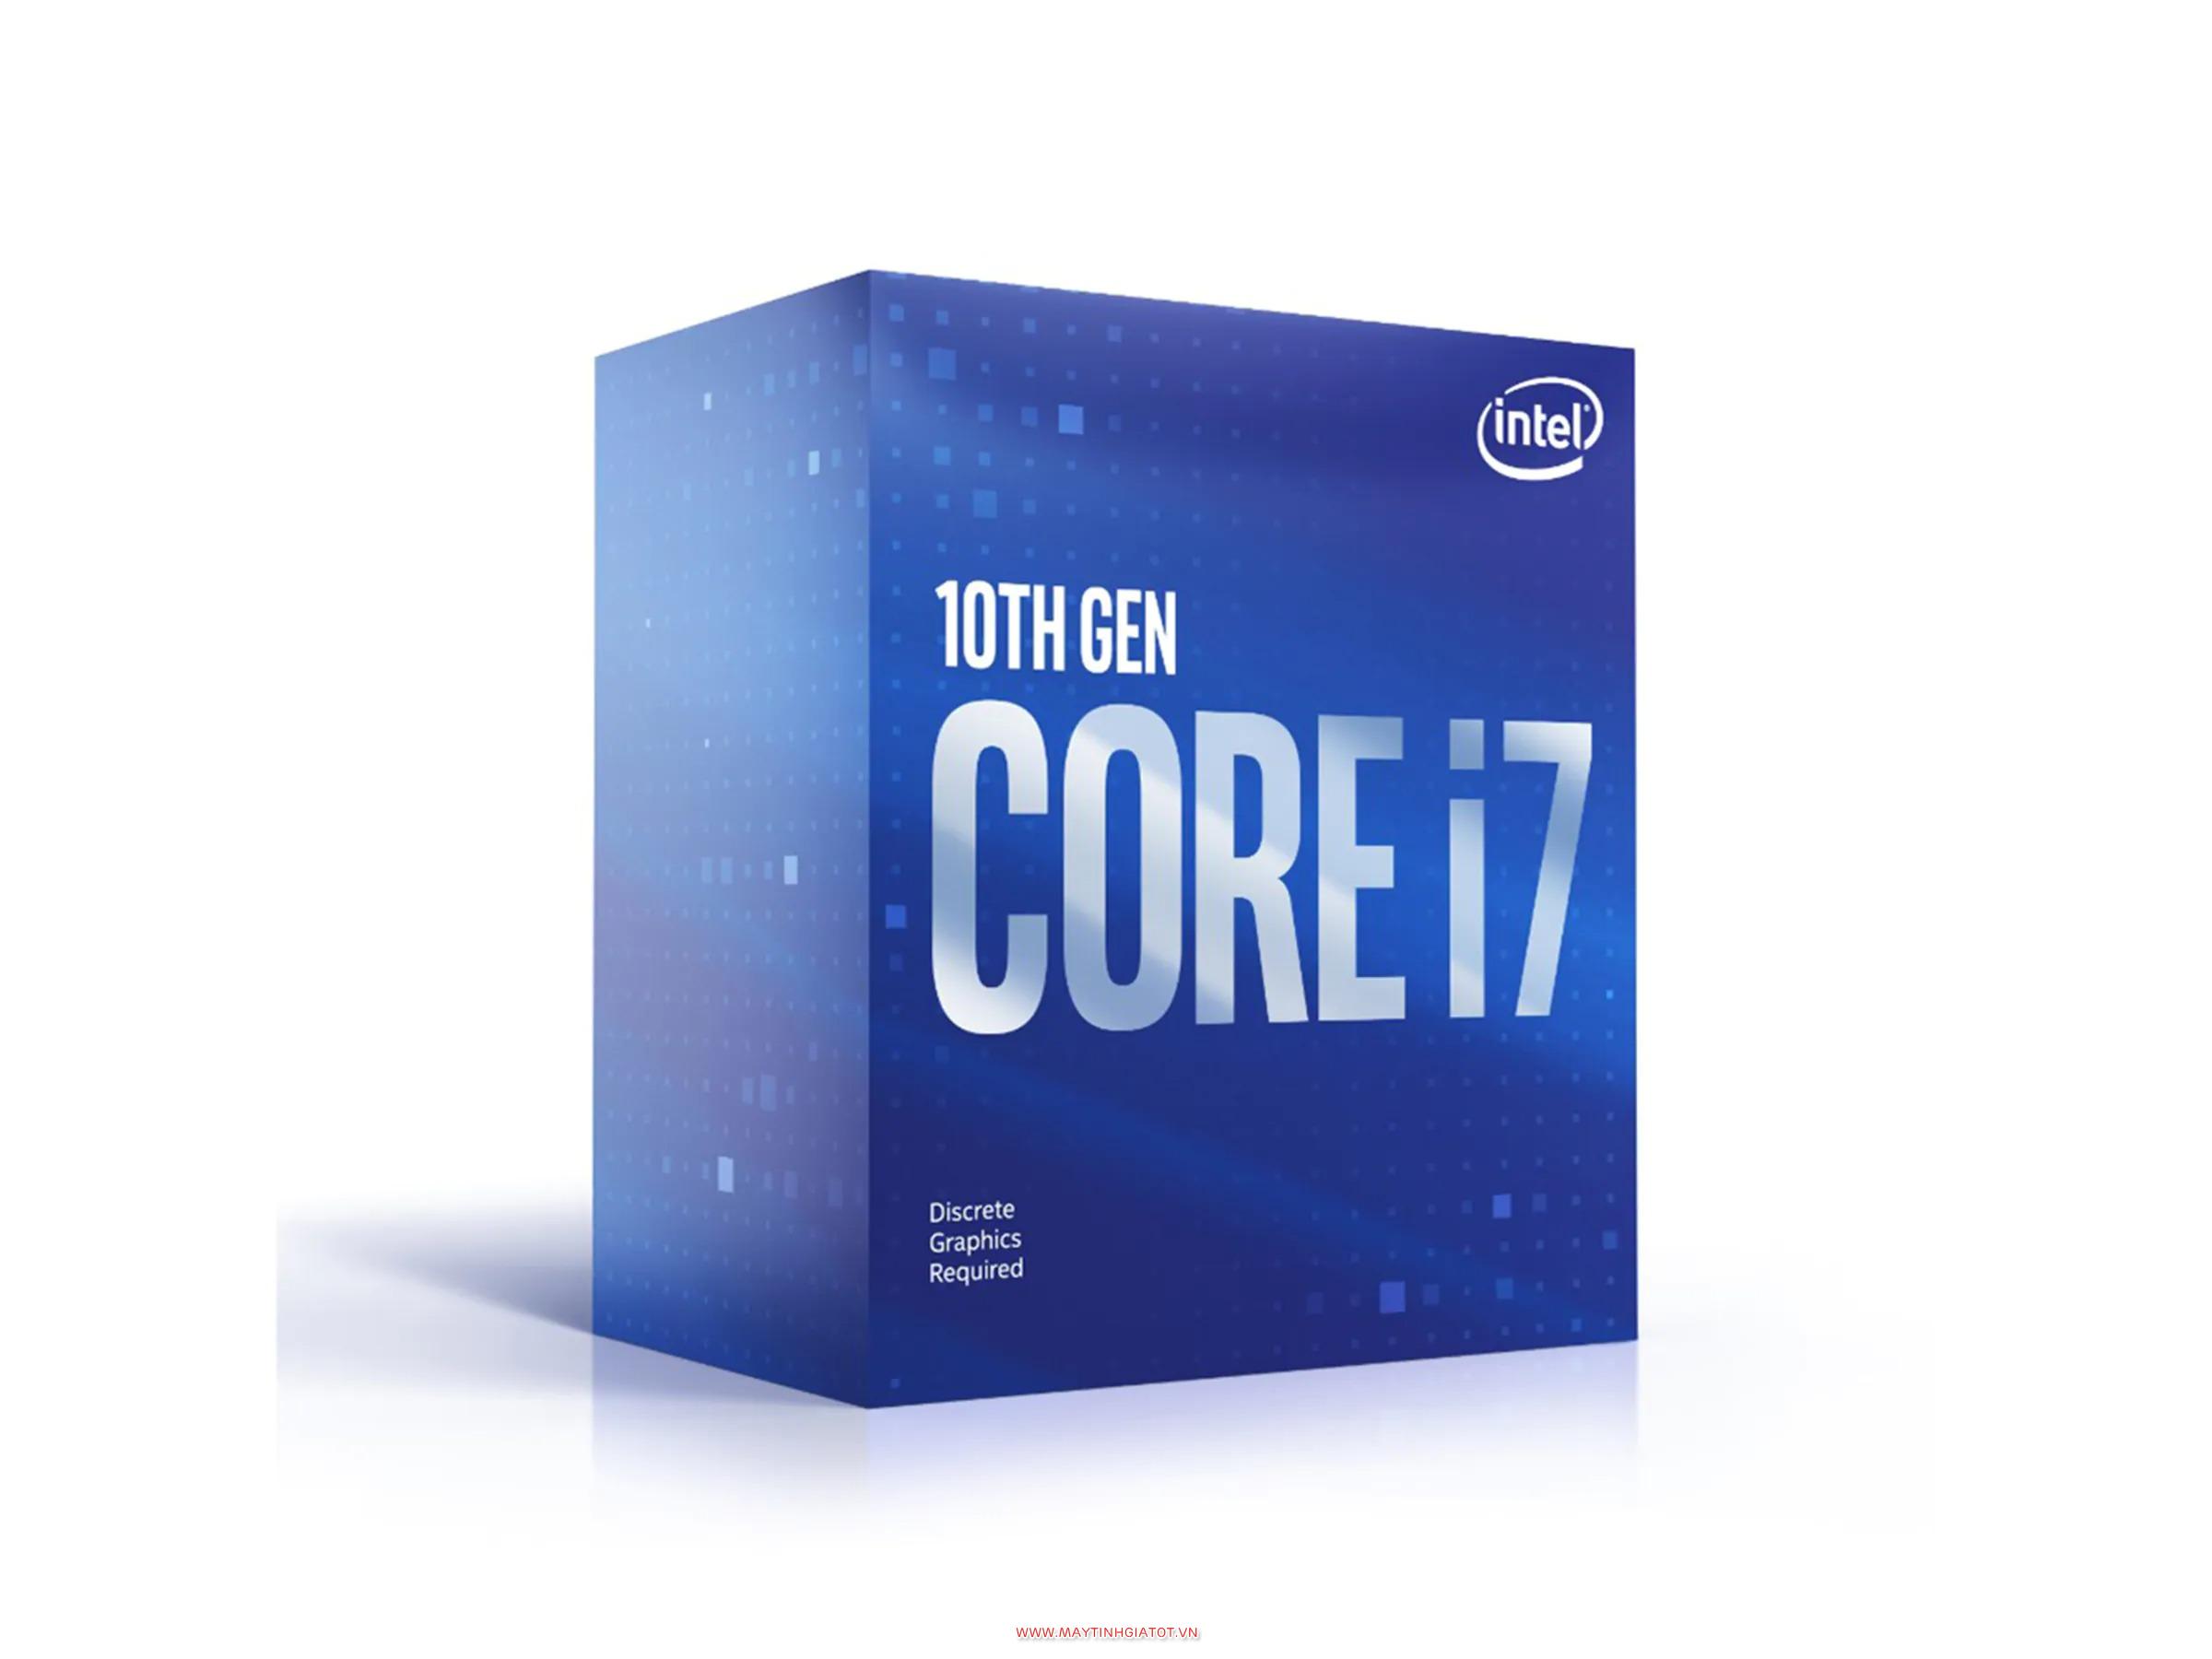 CPU Intel Core i7-10700 (16M Cache, 2.90 GHz up to 4.80 GHz, 8 Core 16 Threads